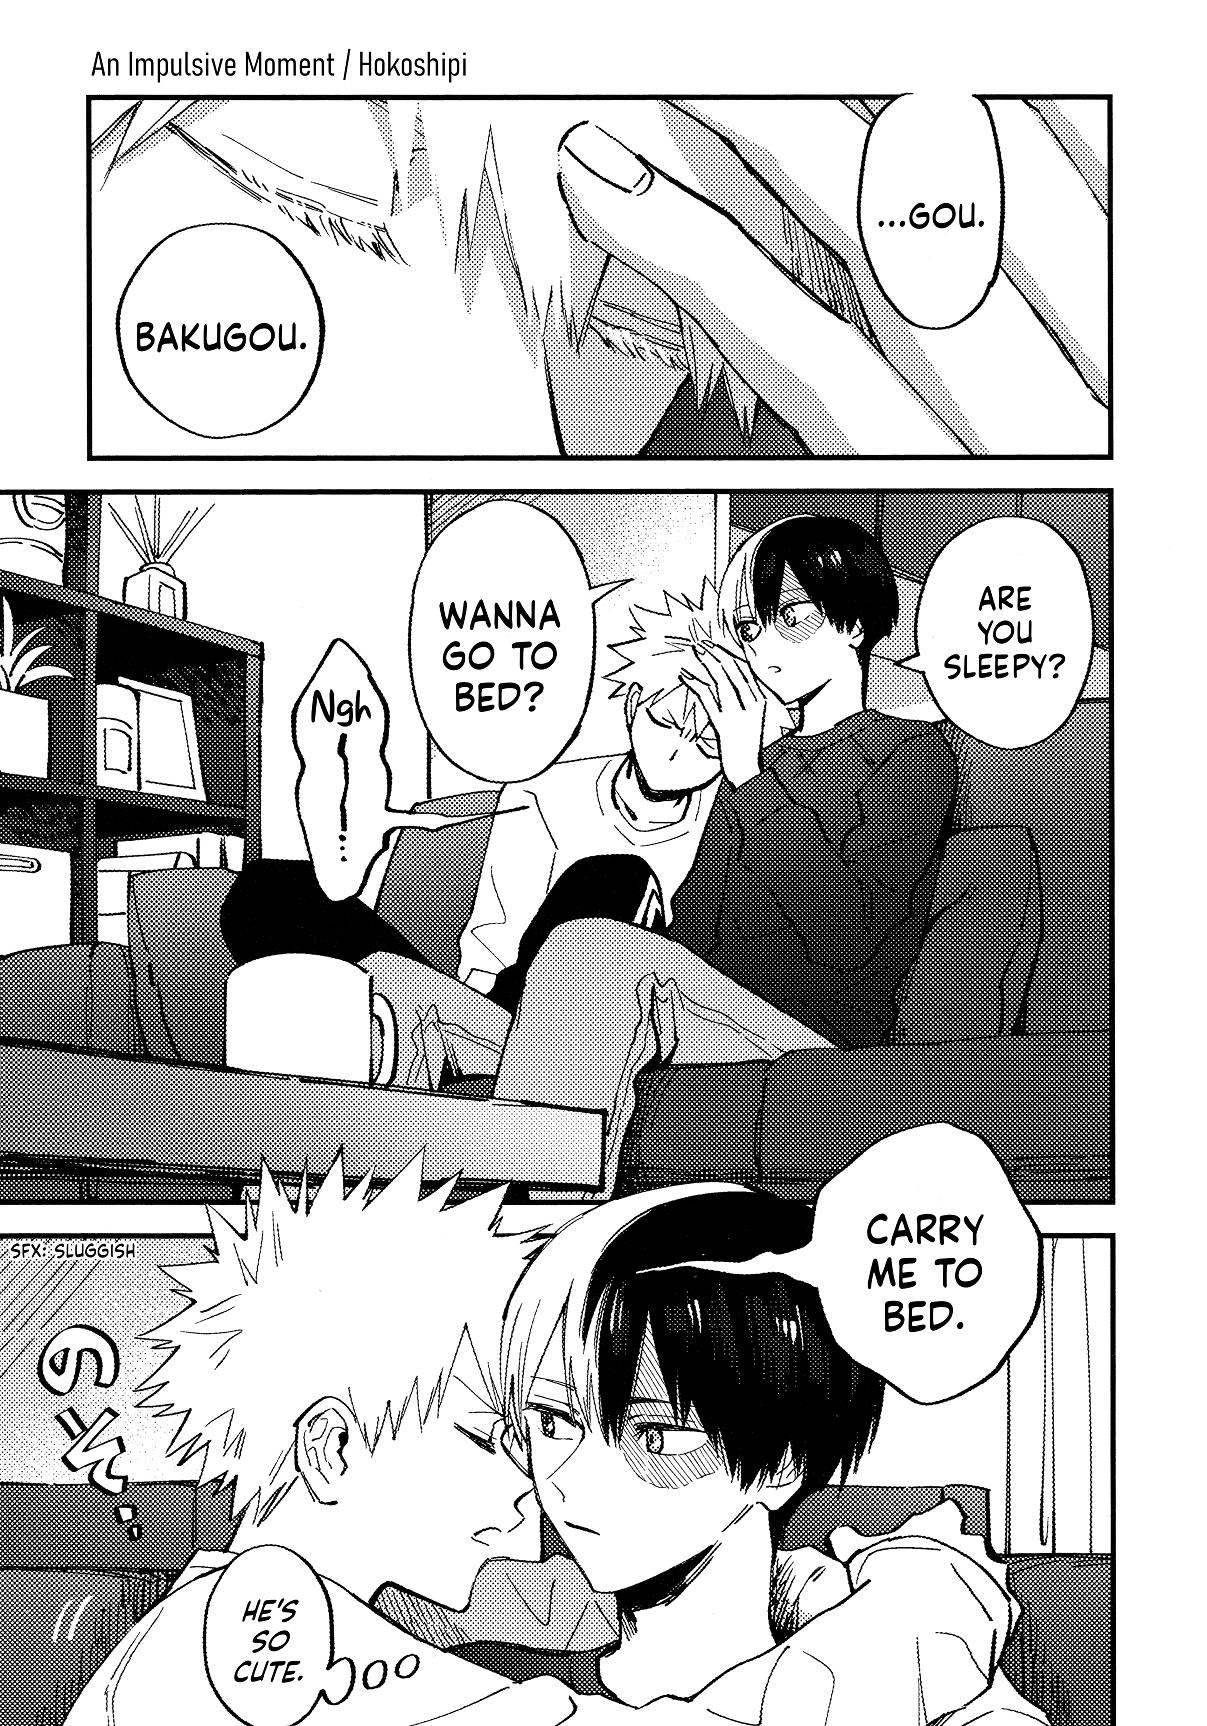 Cheers! - Shouto X Katsuki Marriage Anthology Vol.1 Chapter 11: An Impulsive Moment - Picture 2